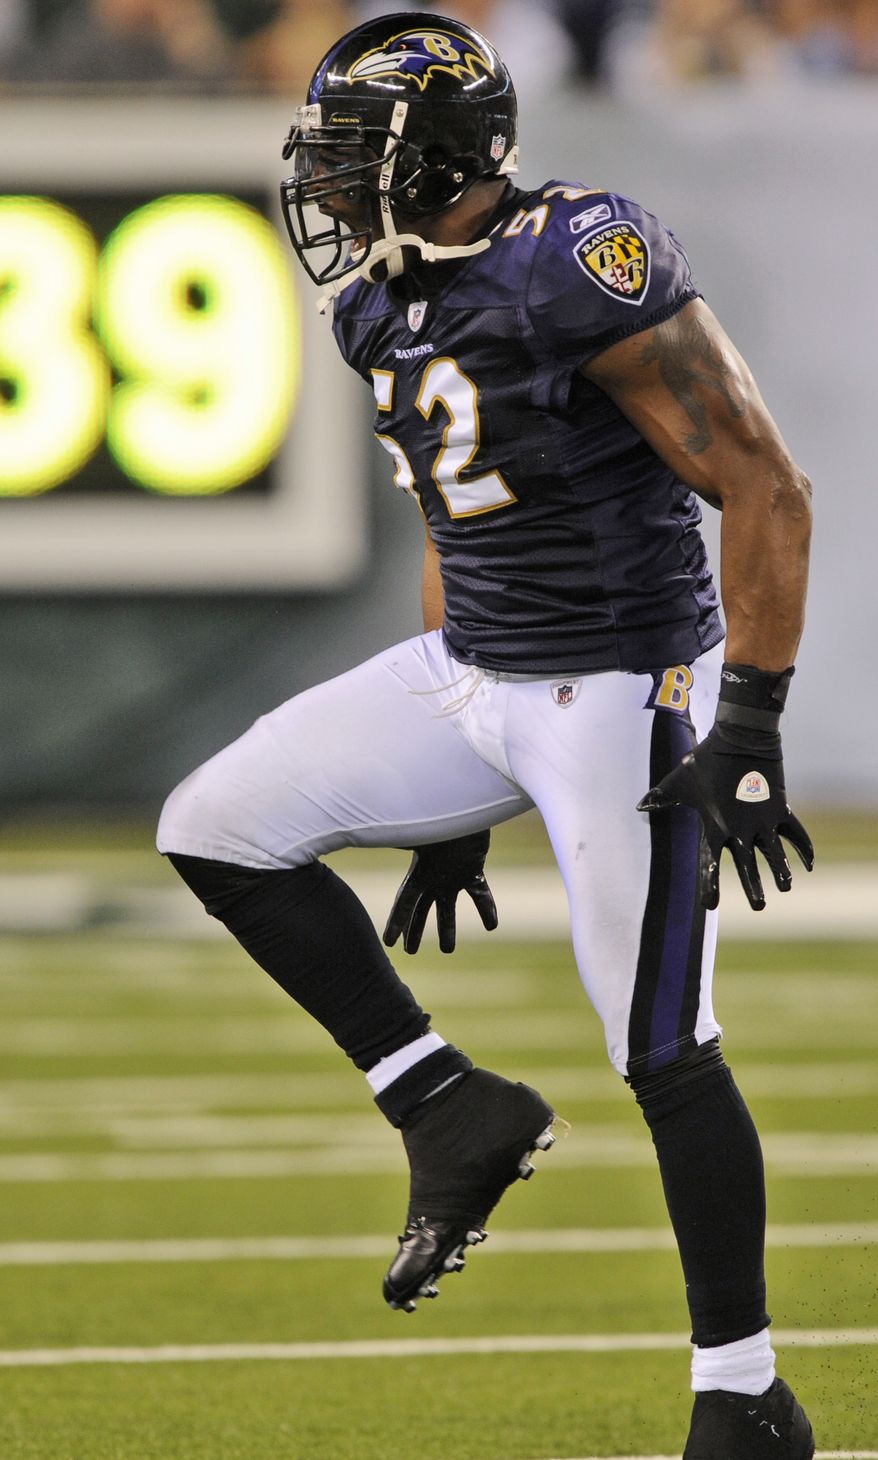 ASSOCIATED PRESS Baltimore Ravens linebacker Ray Lewis  reacts to a play during the third quarter of an NFL football game against the New York Jets at New Meadowlands Stadium in East Rutherford, N.J., Monday, Sept. 13, 2010.